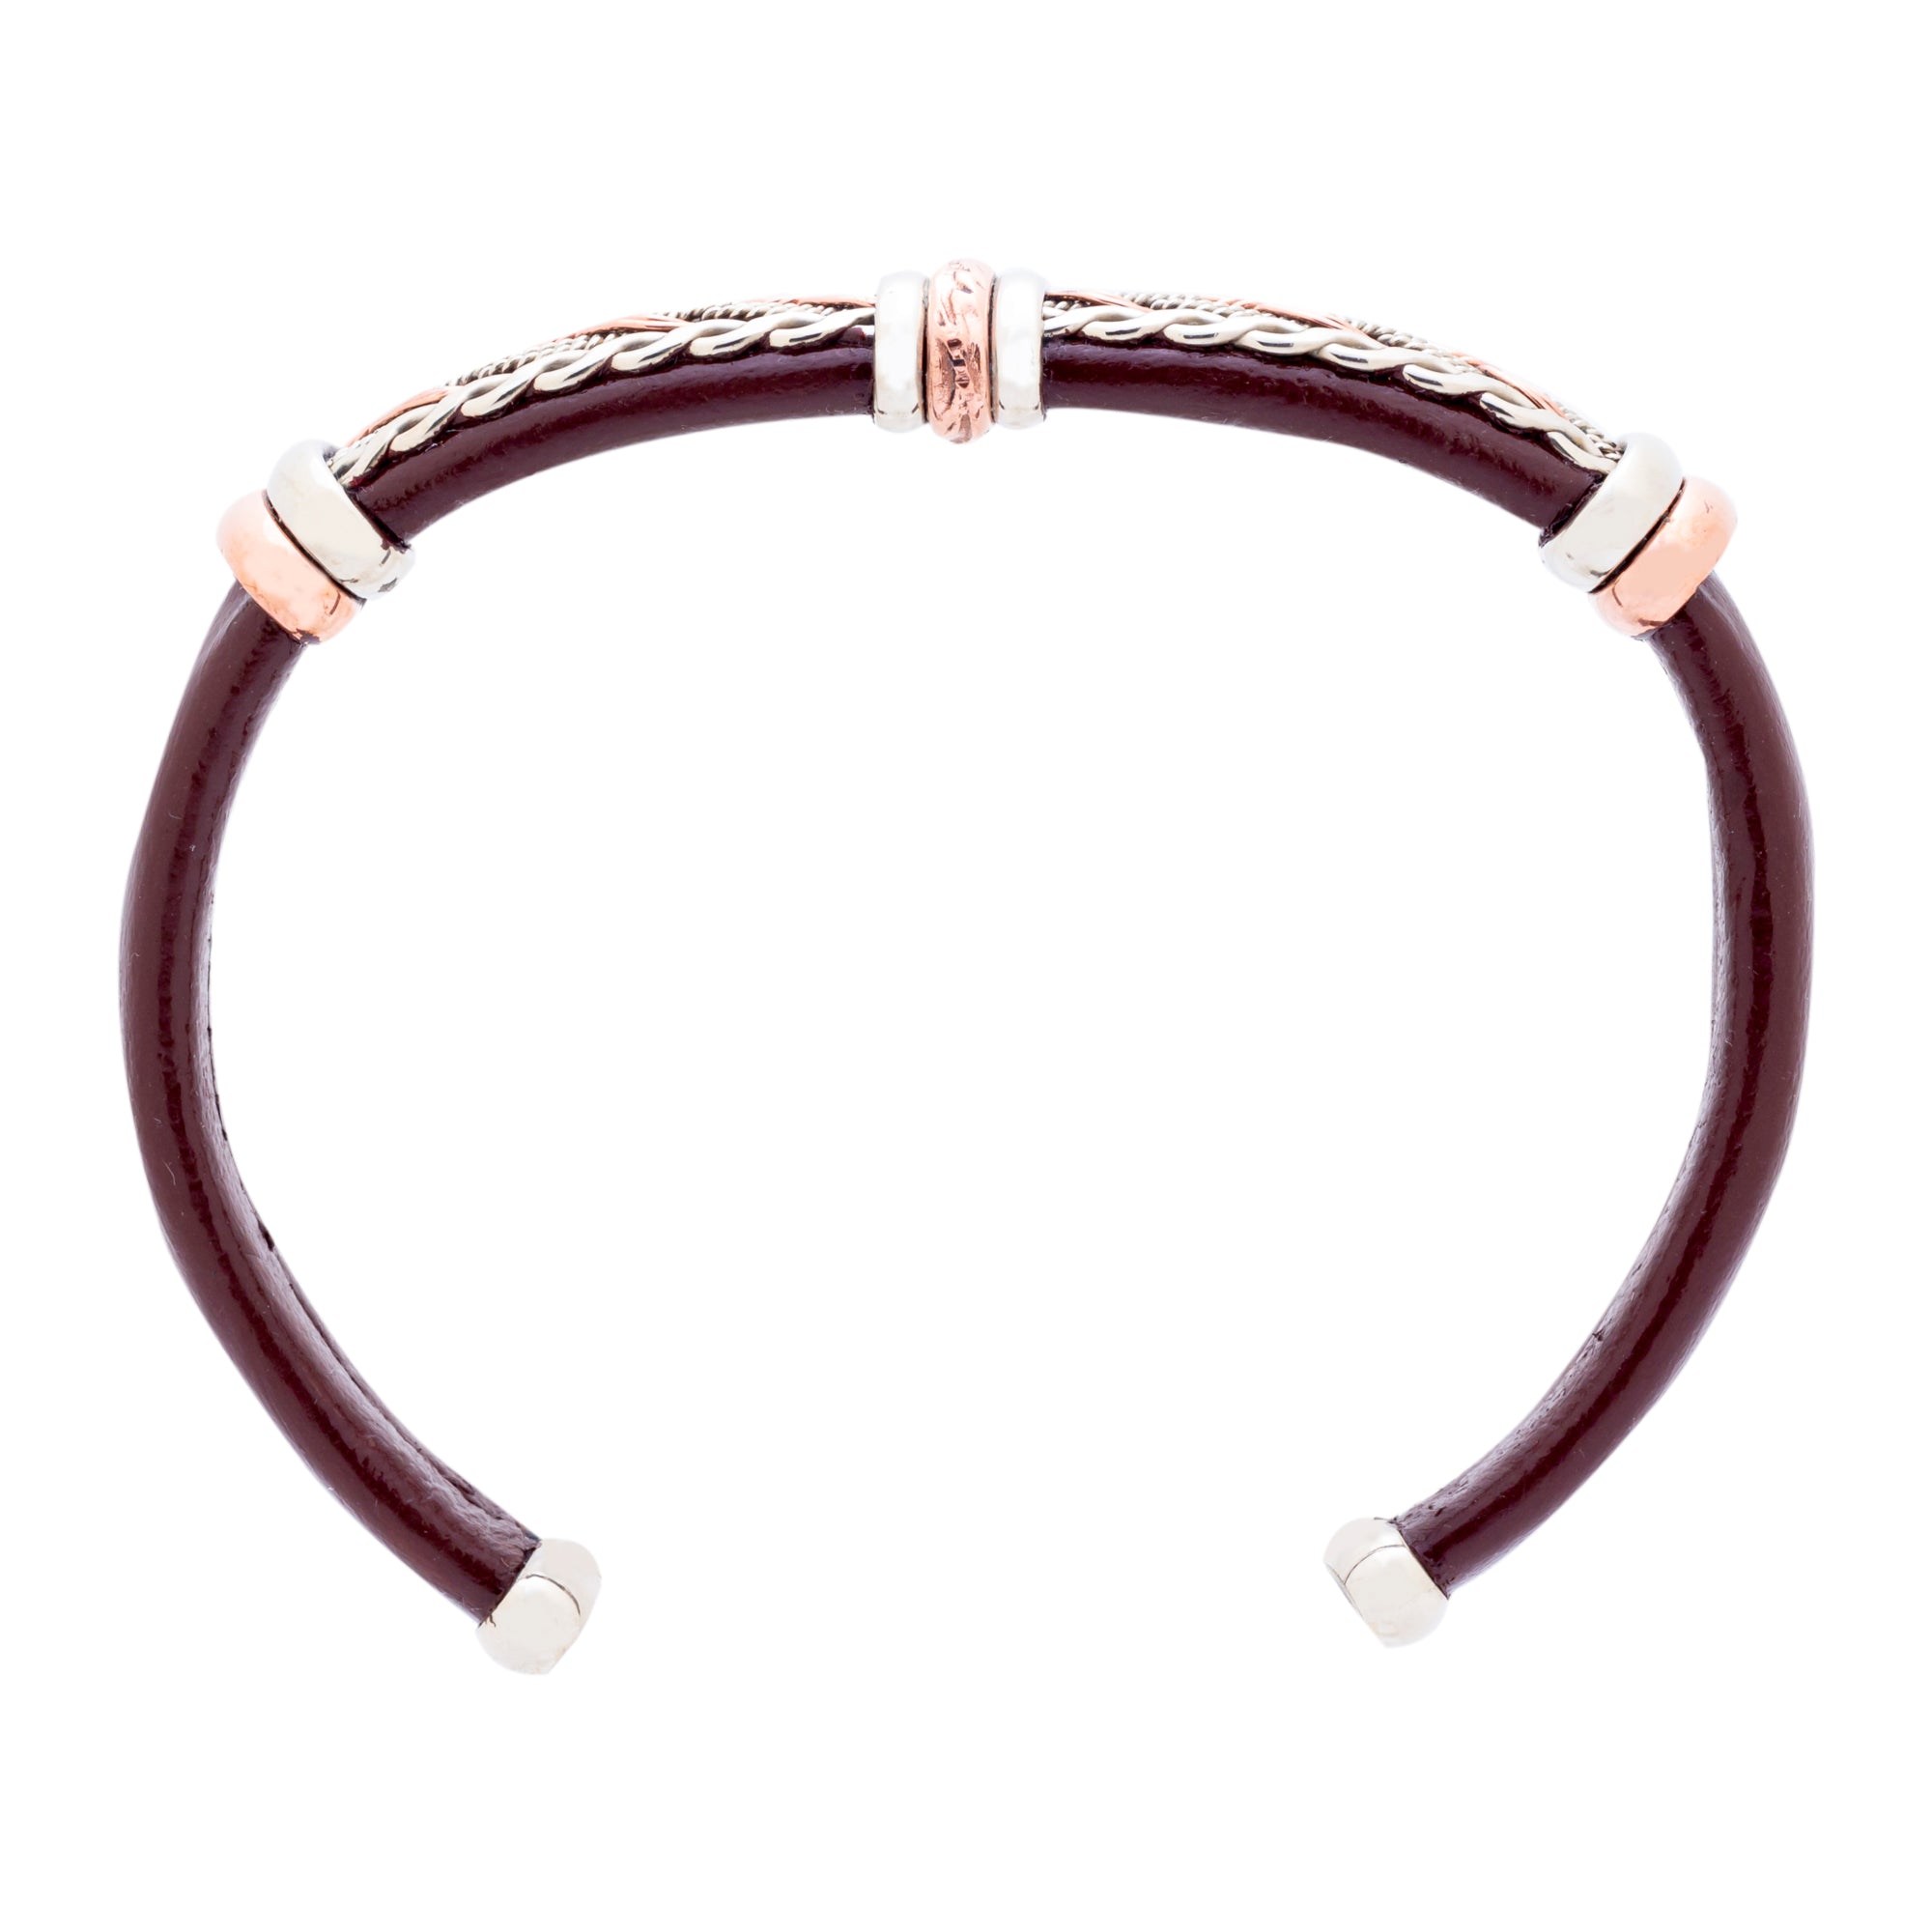 Leather Bracelet BR.ULB.0308 - Brown Leather Cuff Bracelet -Handcrafted by HPSilver, LLC.